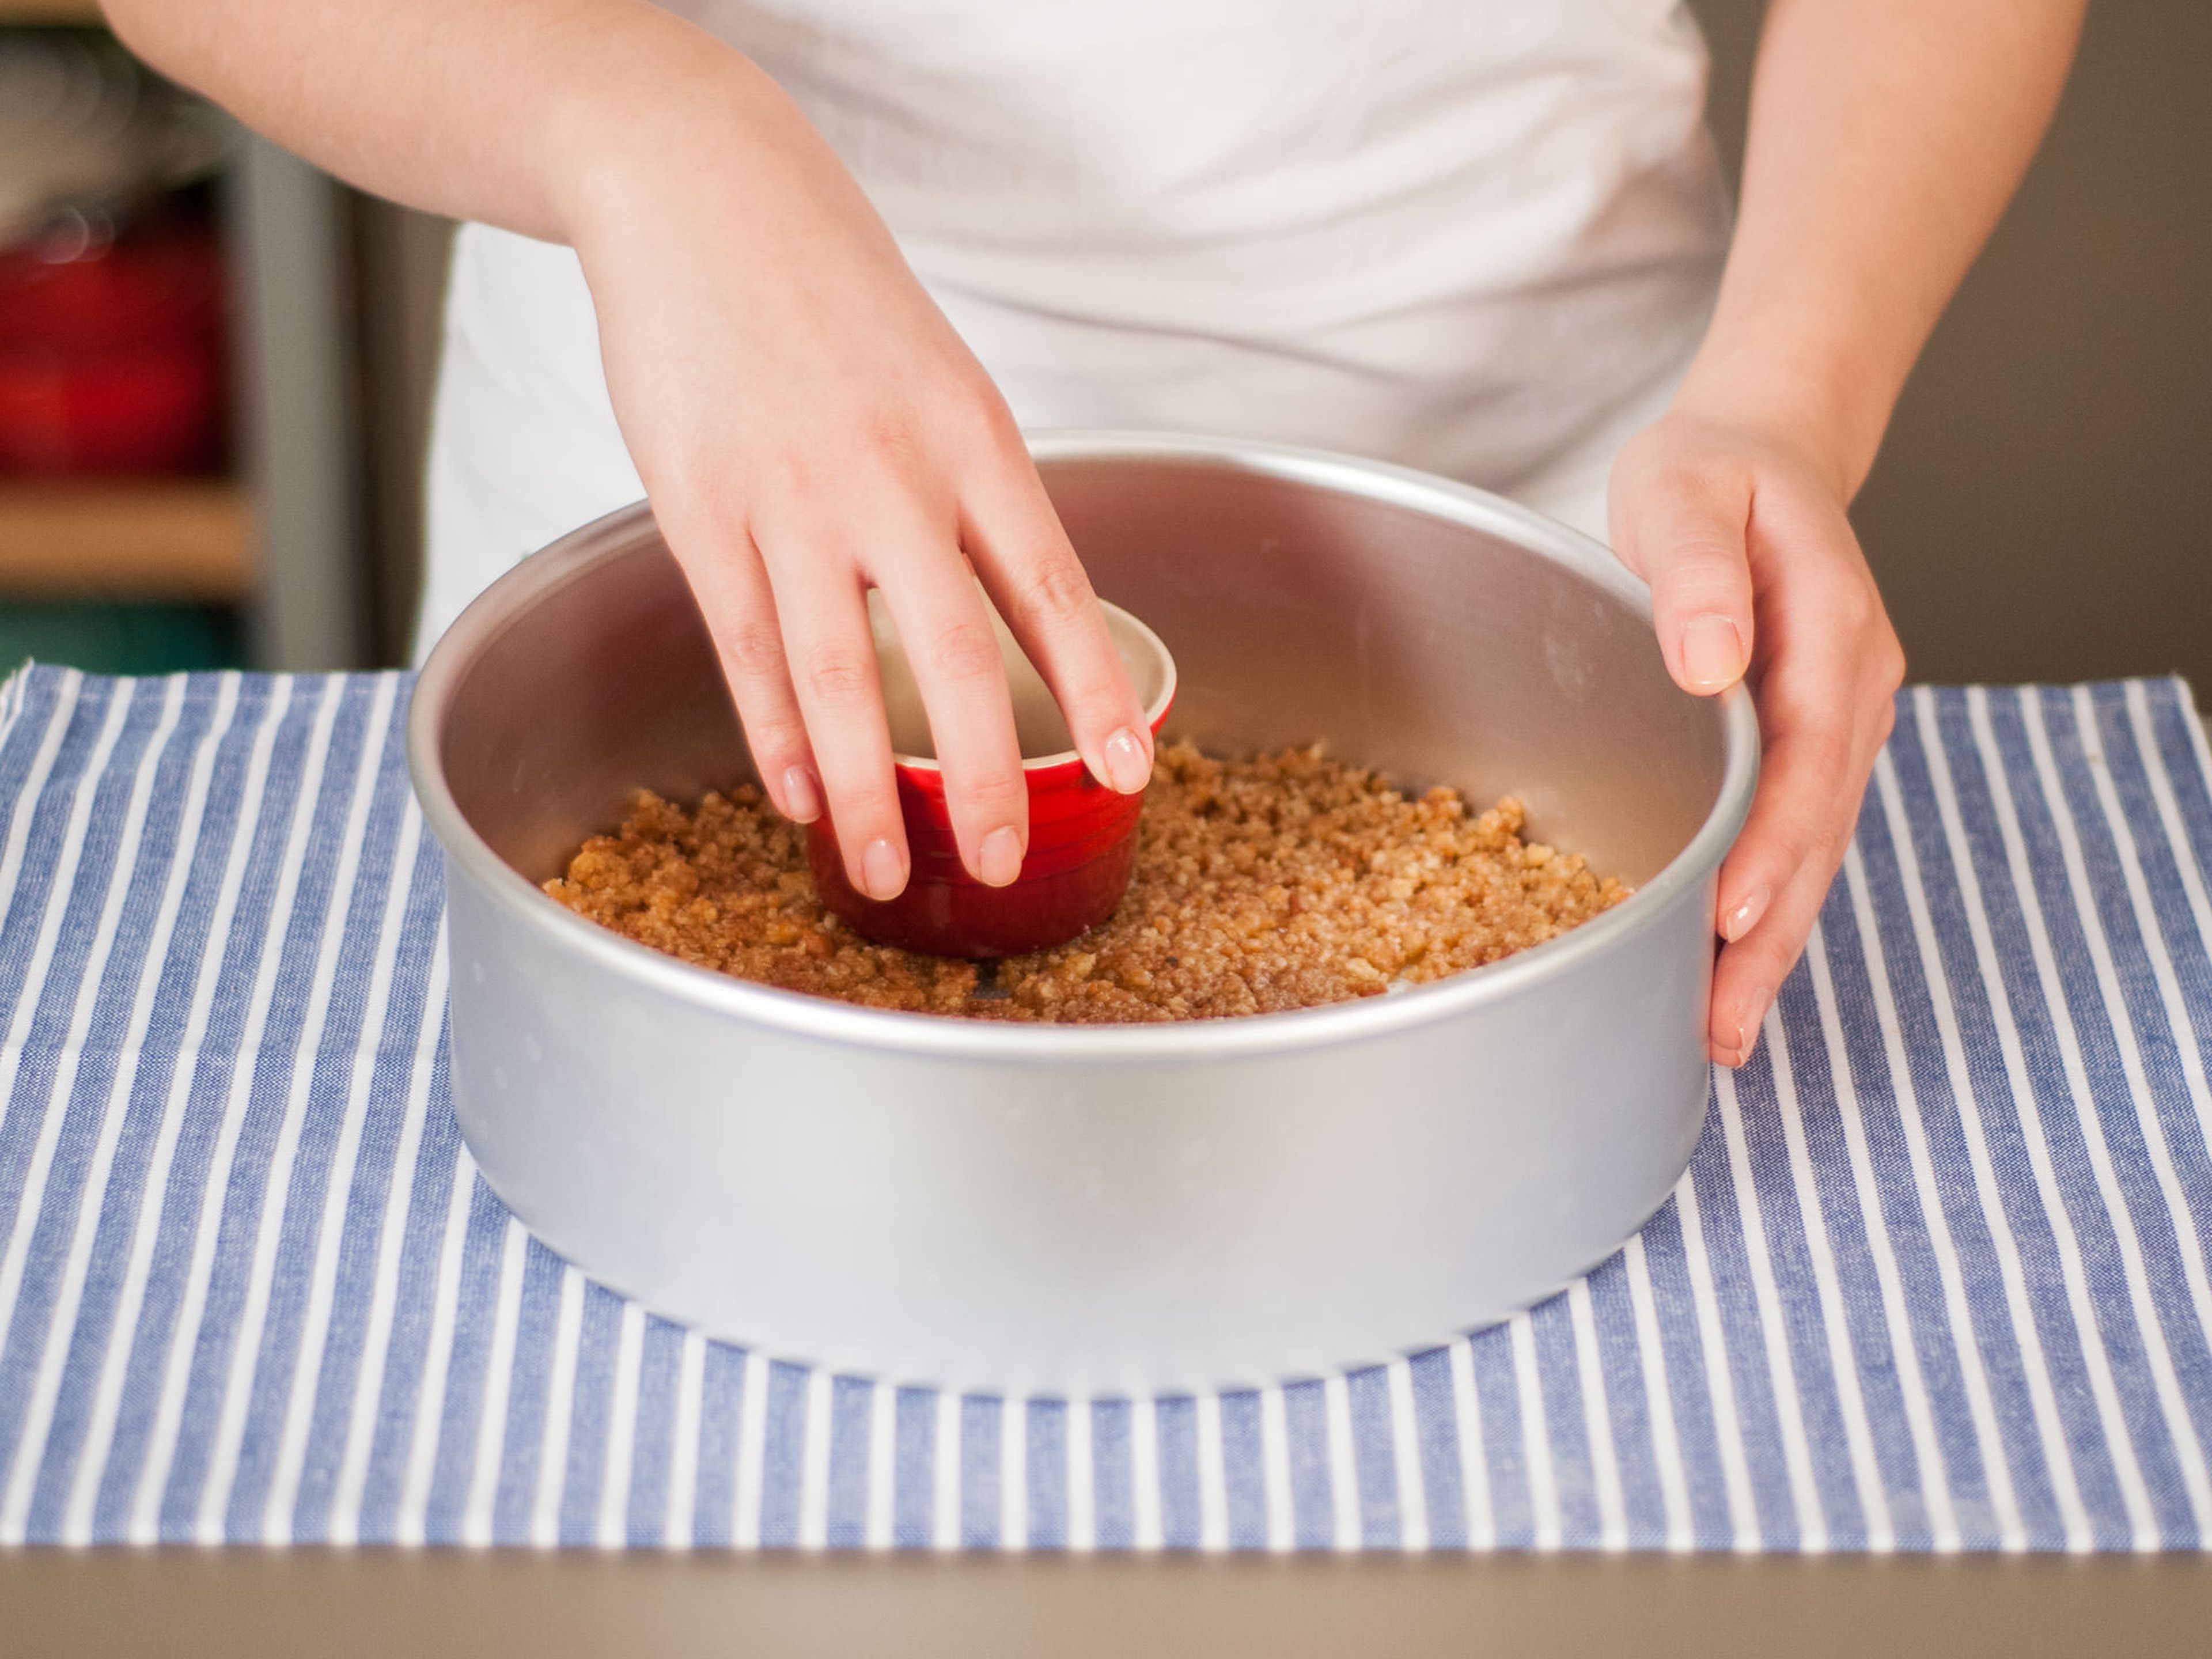 Add cookie crumb mixture to a round baking form and press firmly into bottom of baking form.